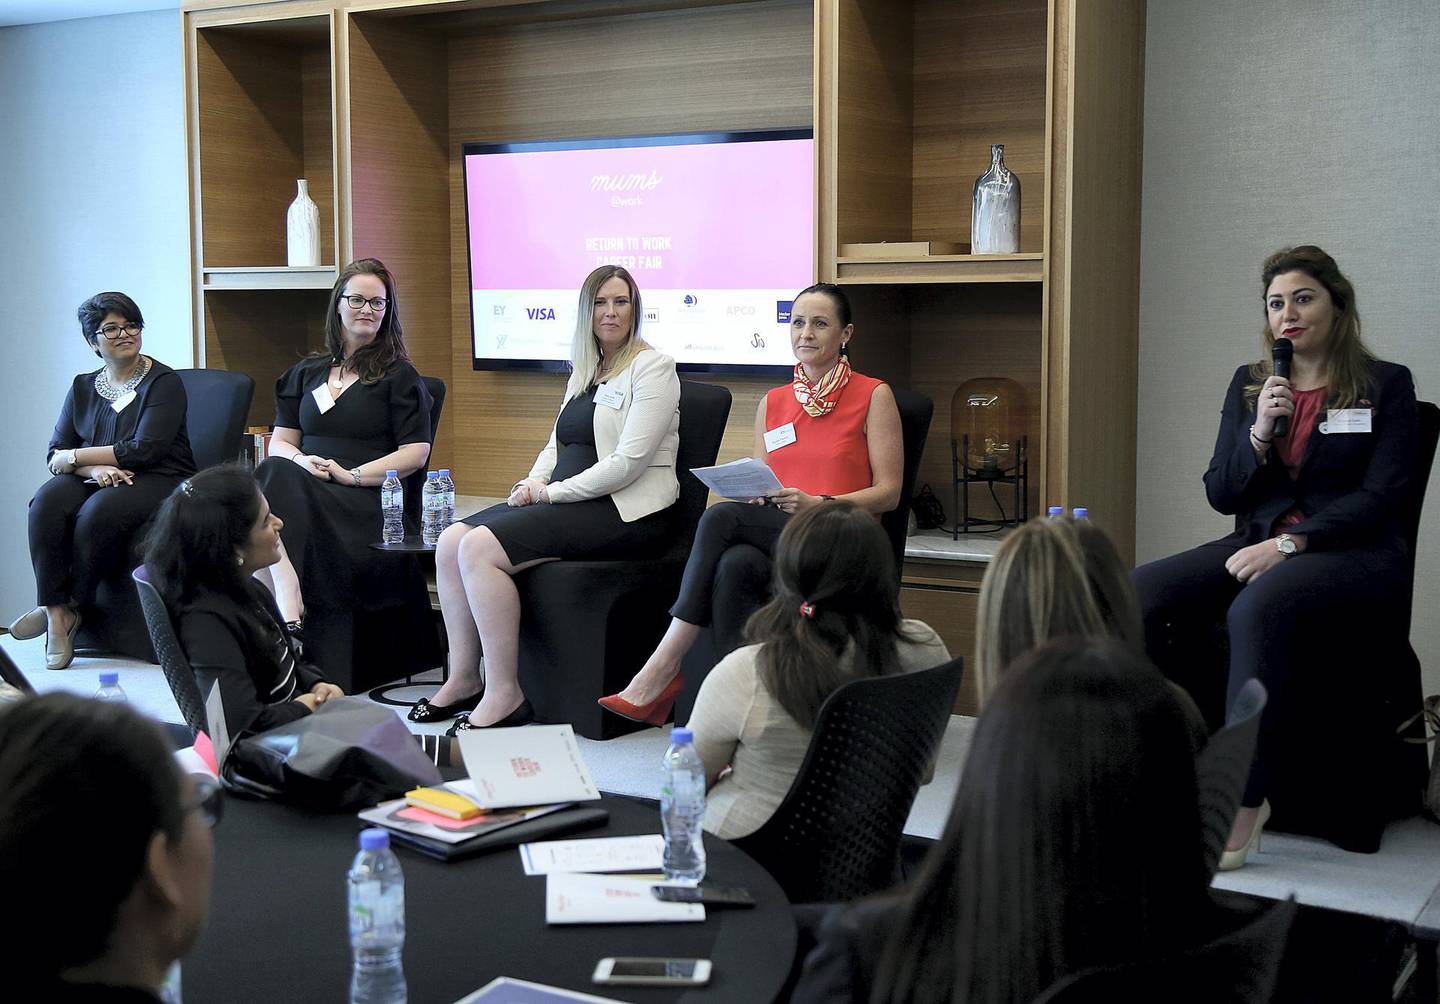 Dubai, March 01,2018: ( L to R ) Panellists Elizabeth Sen, Jane Siney,Kate Lane, Rachel Ellyard,and Solange Corm at The Return to Work Career Fair in Dubai. Satish Kumar for the National/ Story by Alice